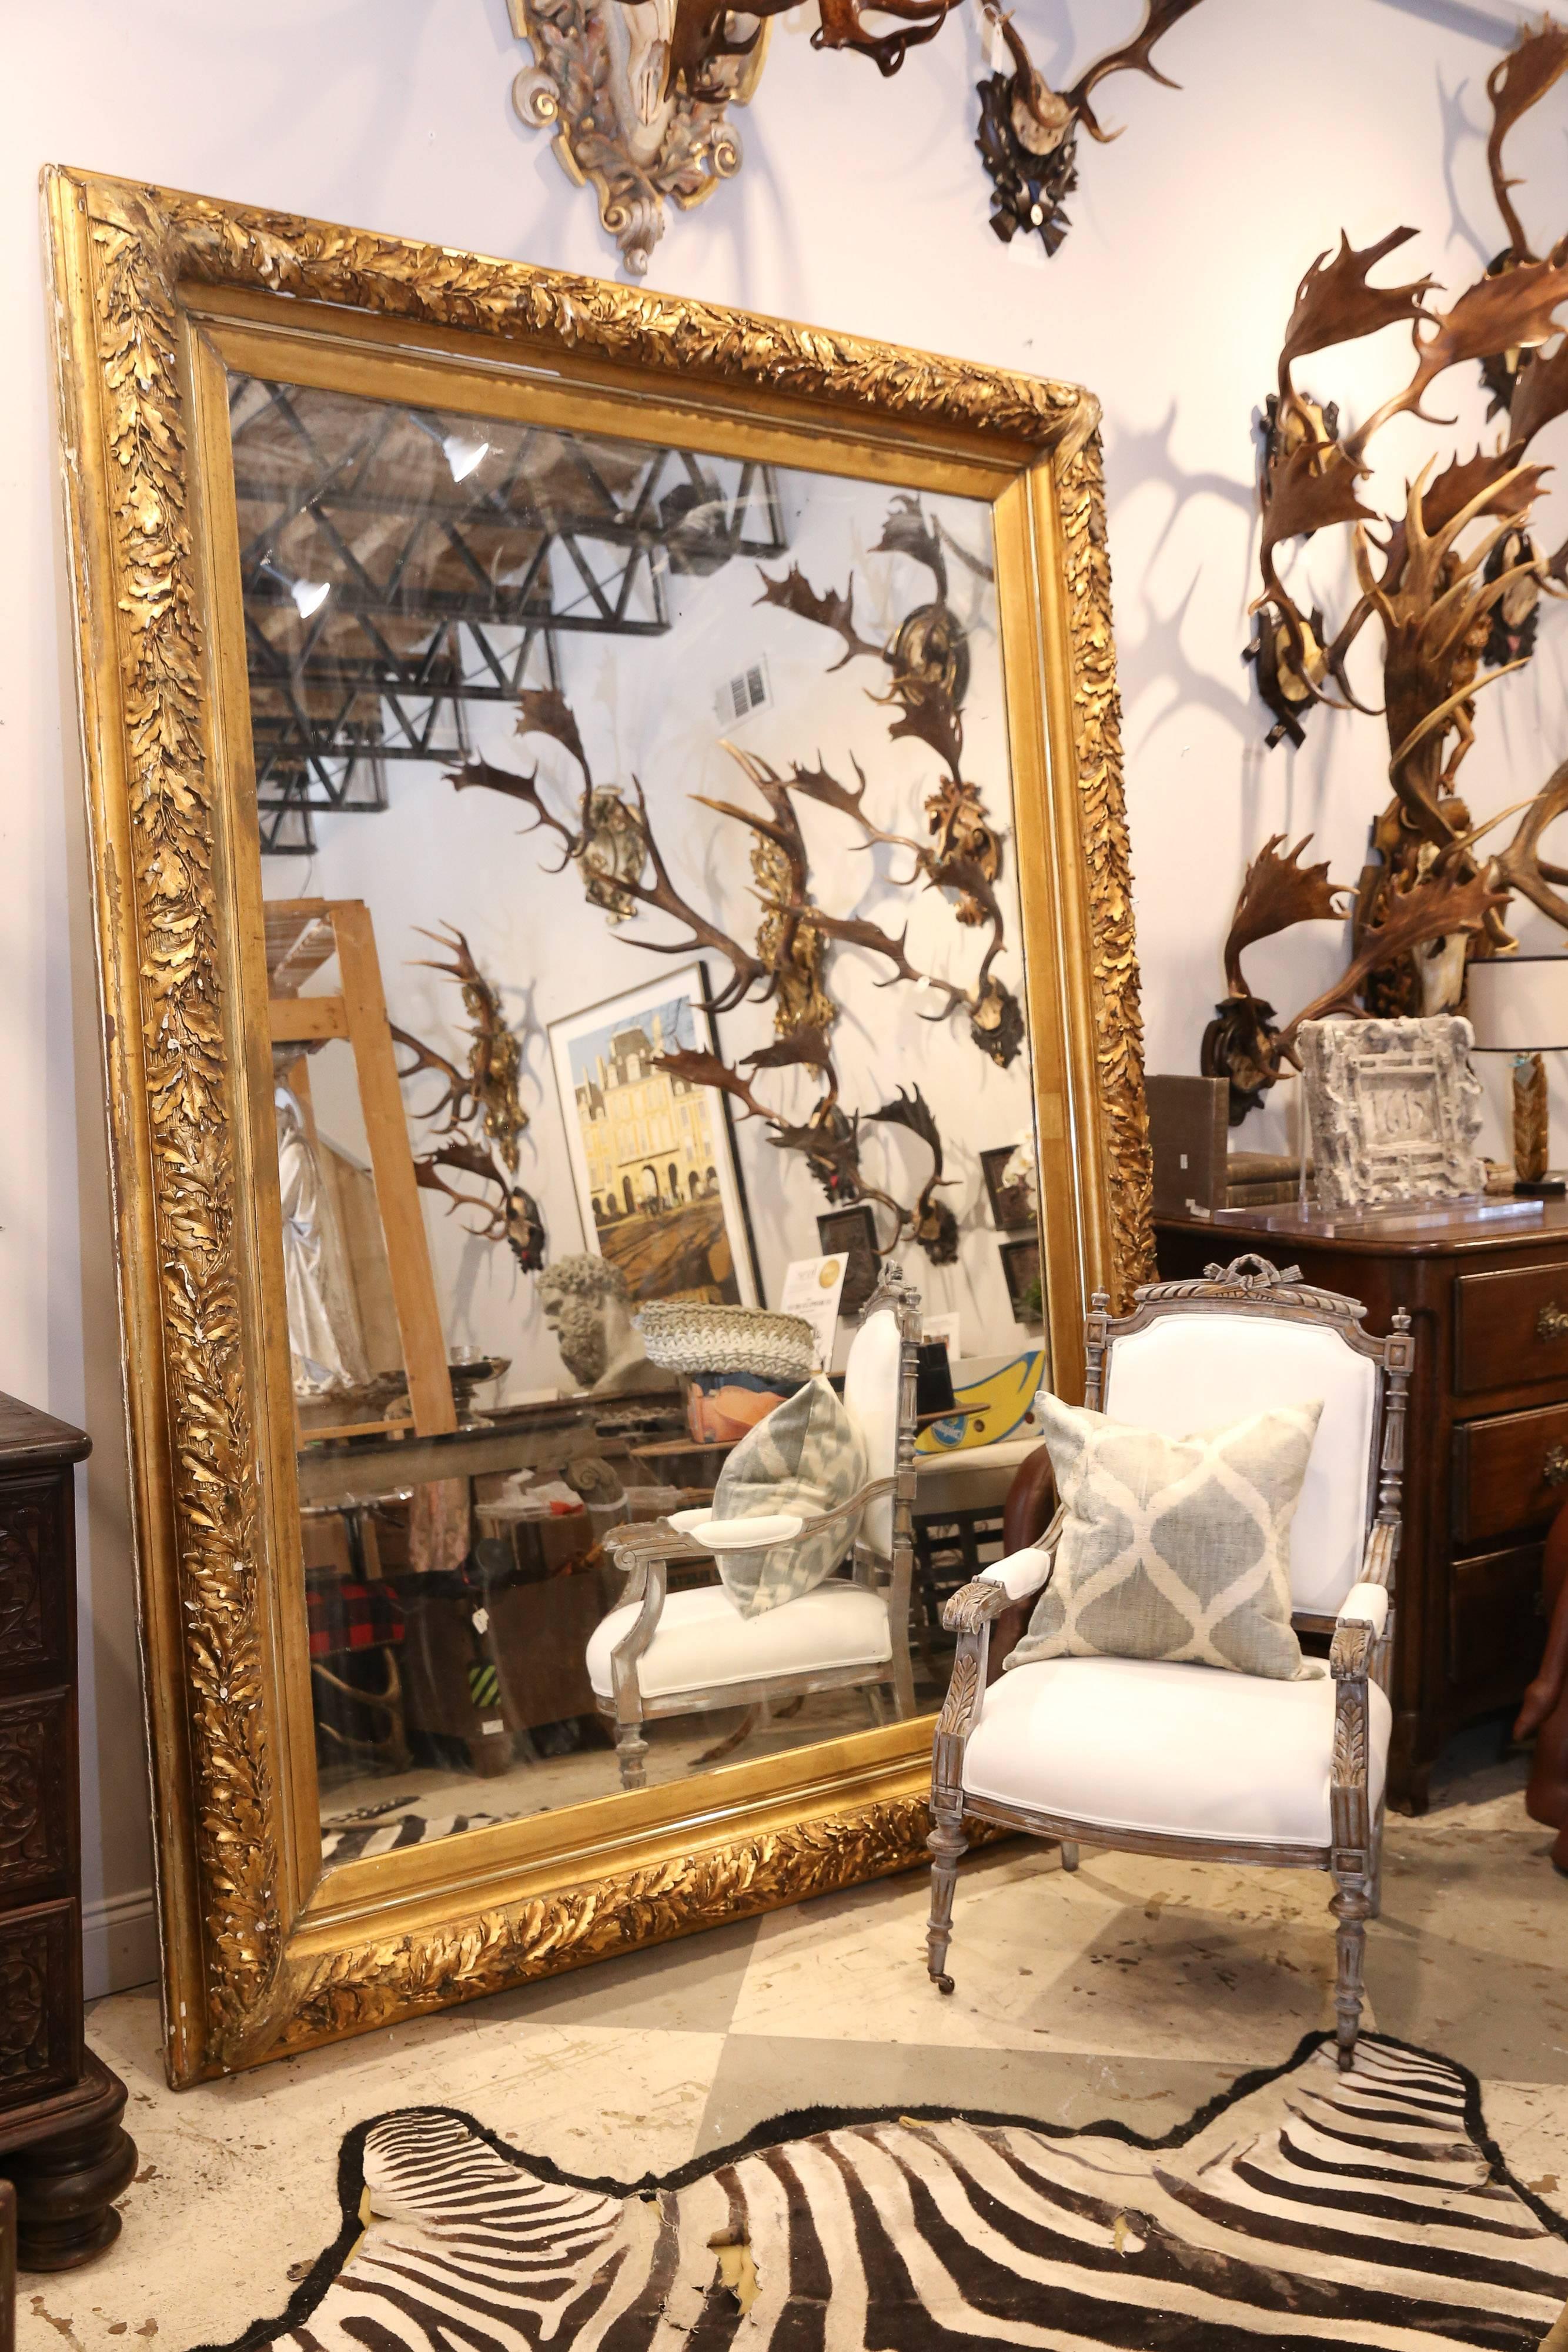 Antique French carved gilt mirror with oak leaf and acorn detail that we discovered during our recent time in Europe. Exquisitely carved ashwood and edges of mirror are distressed in certain areas given its age and use over time. Believed to date to